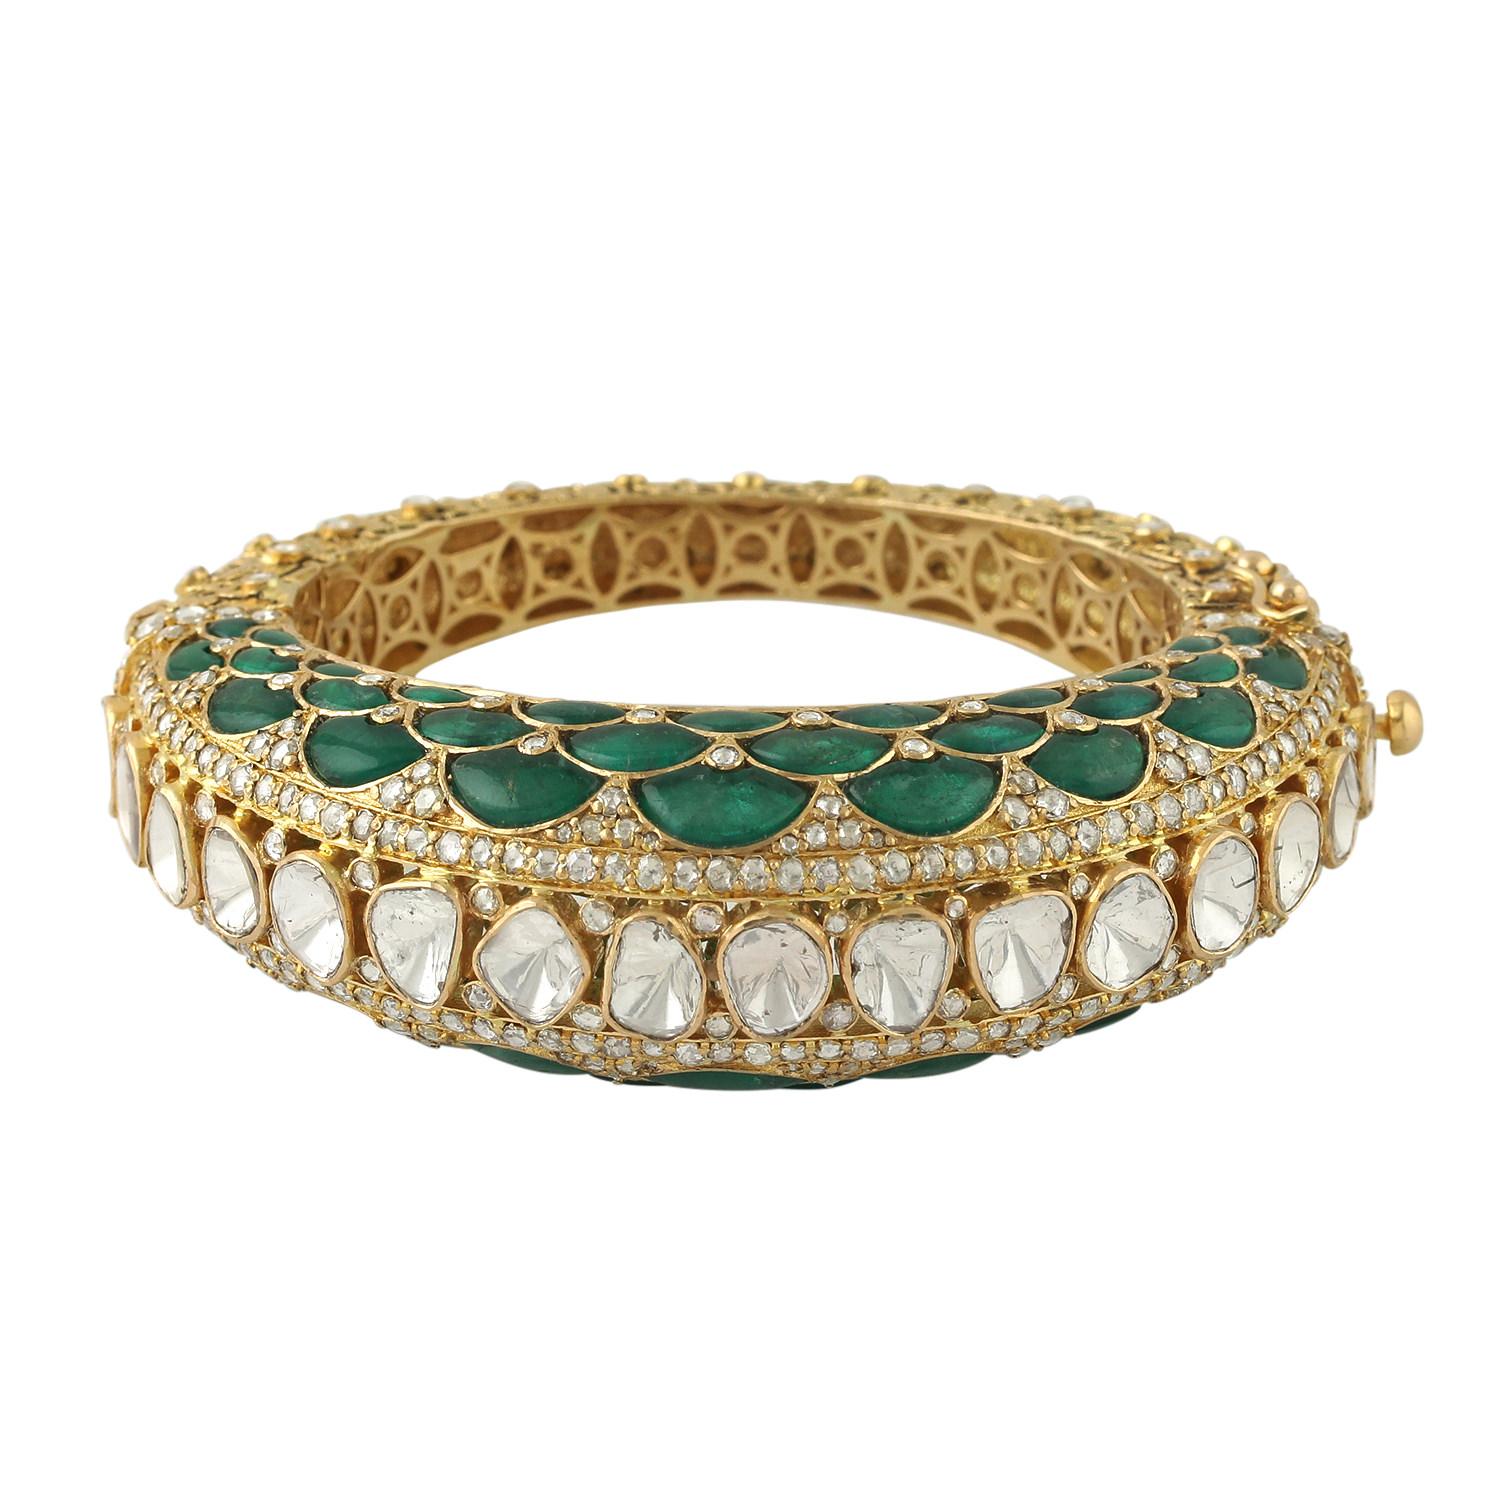 A stunning bangle bracelet handmade in 14K gold.  It is set in 28.95 carats emerald and 11.85 carats rose cut diamonds. Clasp Closure.

FOLLOW  MEGHNA JEWELS storefront to view the latest collection & exclusive pieces.  Meghna Jewels is proudly